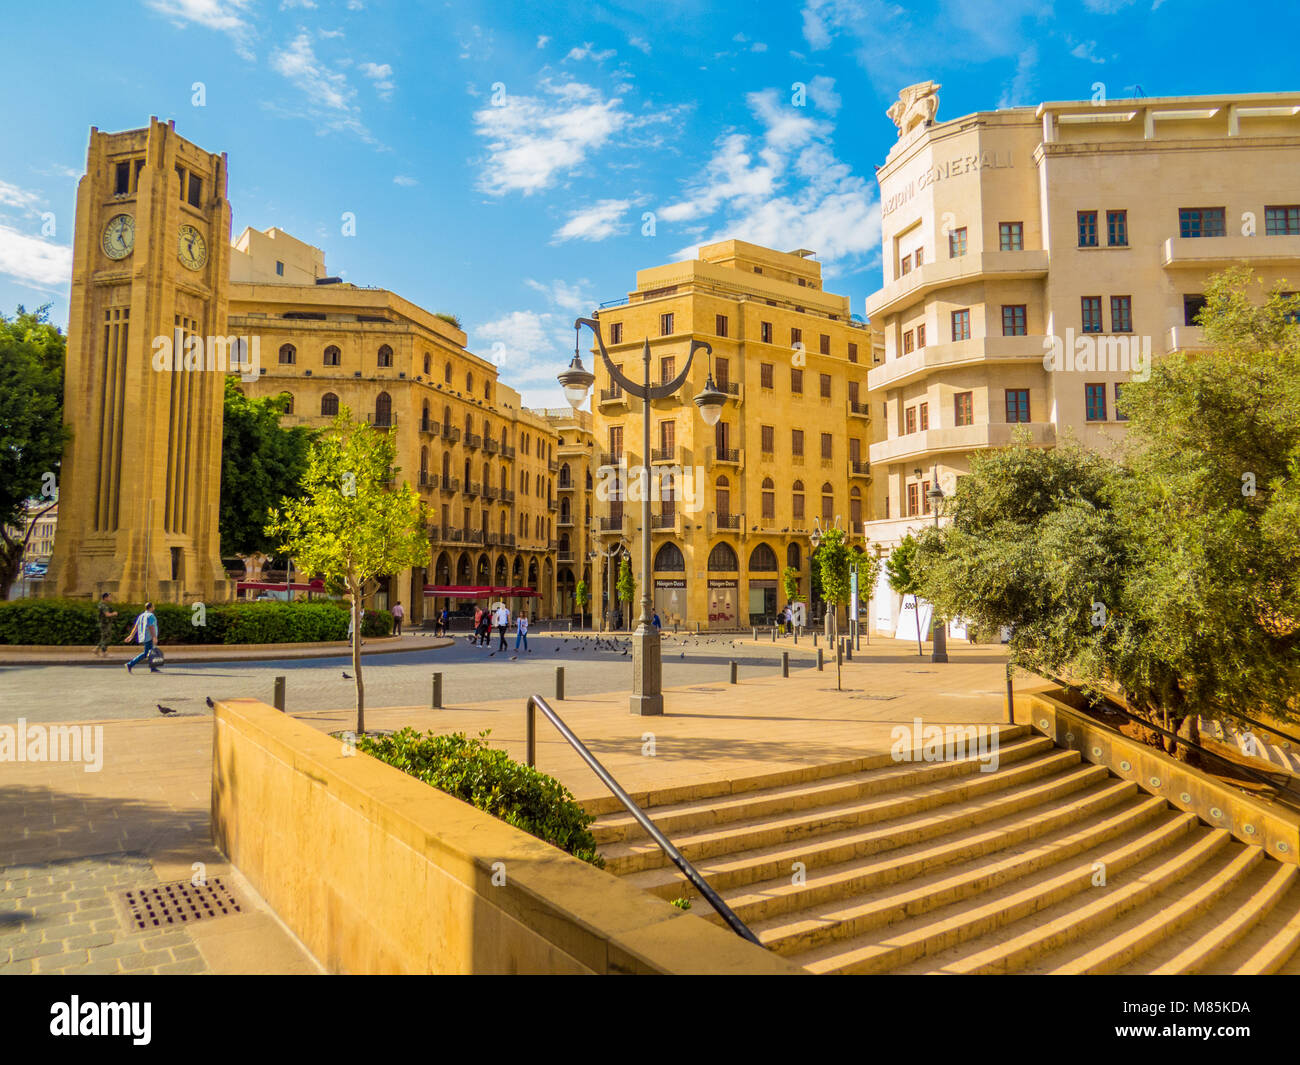 BEIRUT, LEBANON - MAY 22, 2017: View of Beirut Central District (or Centre Ville), the city's historical, geographical, commercial and administrative. Stock Photo